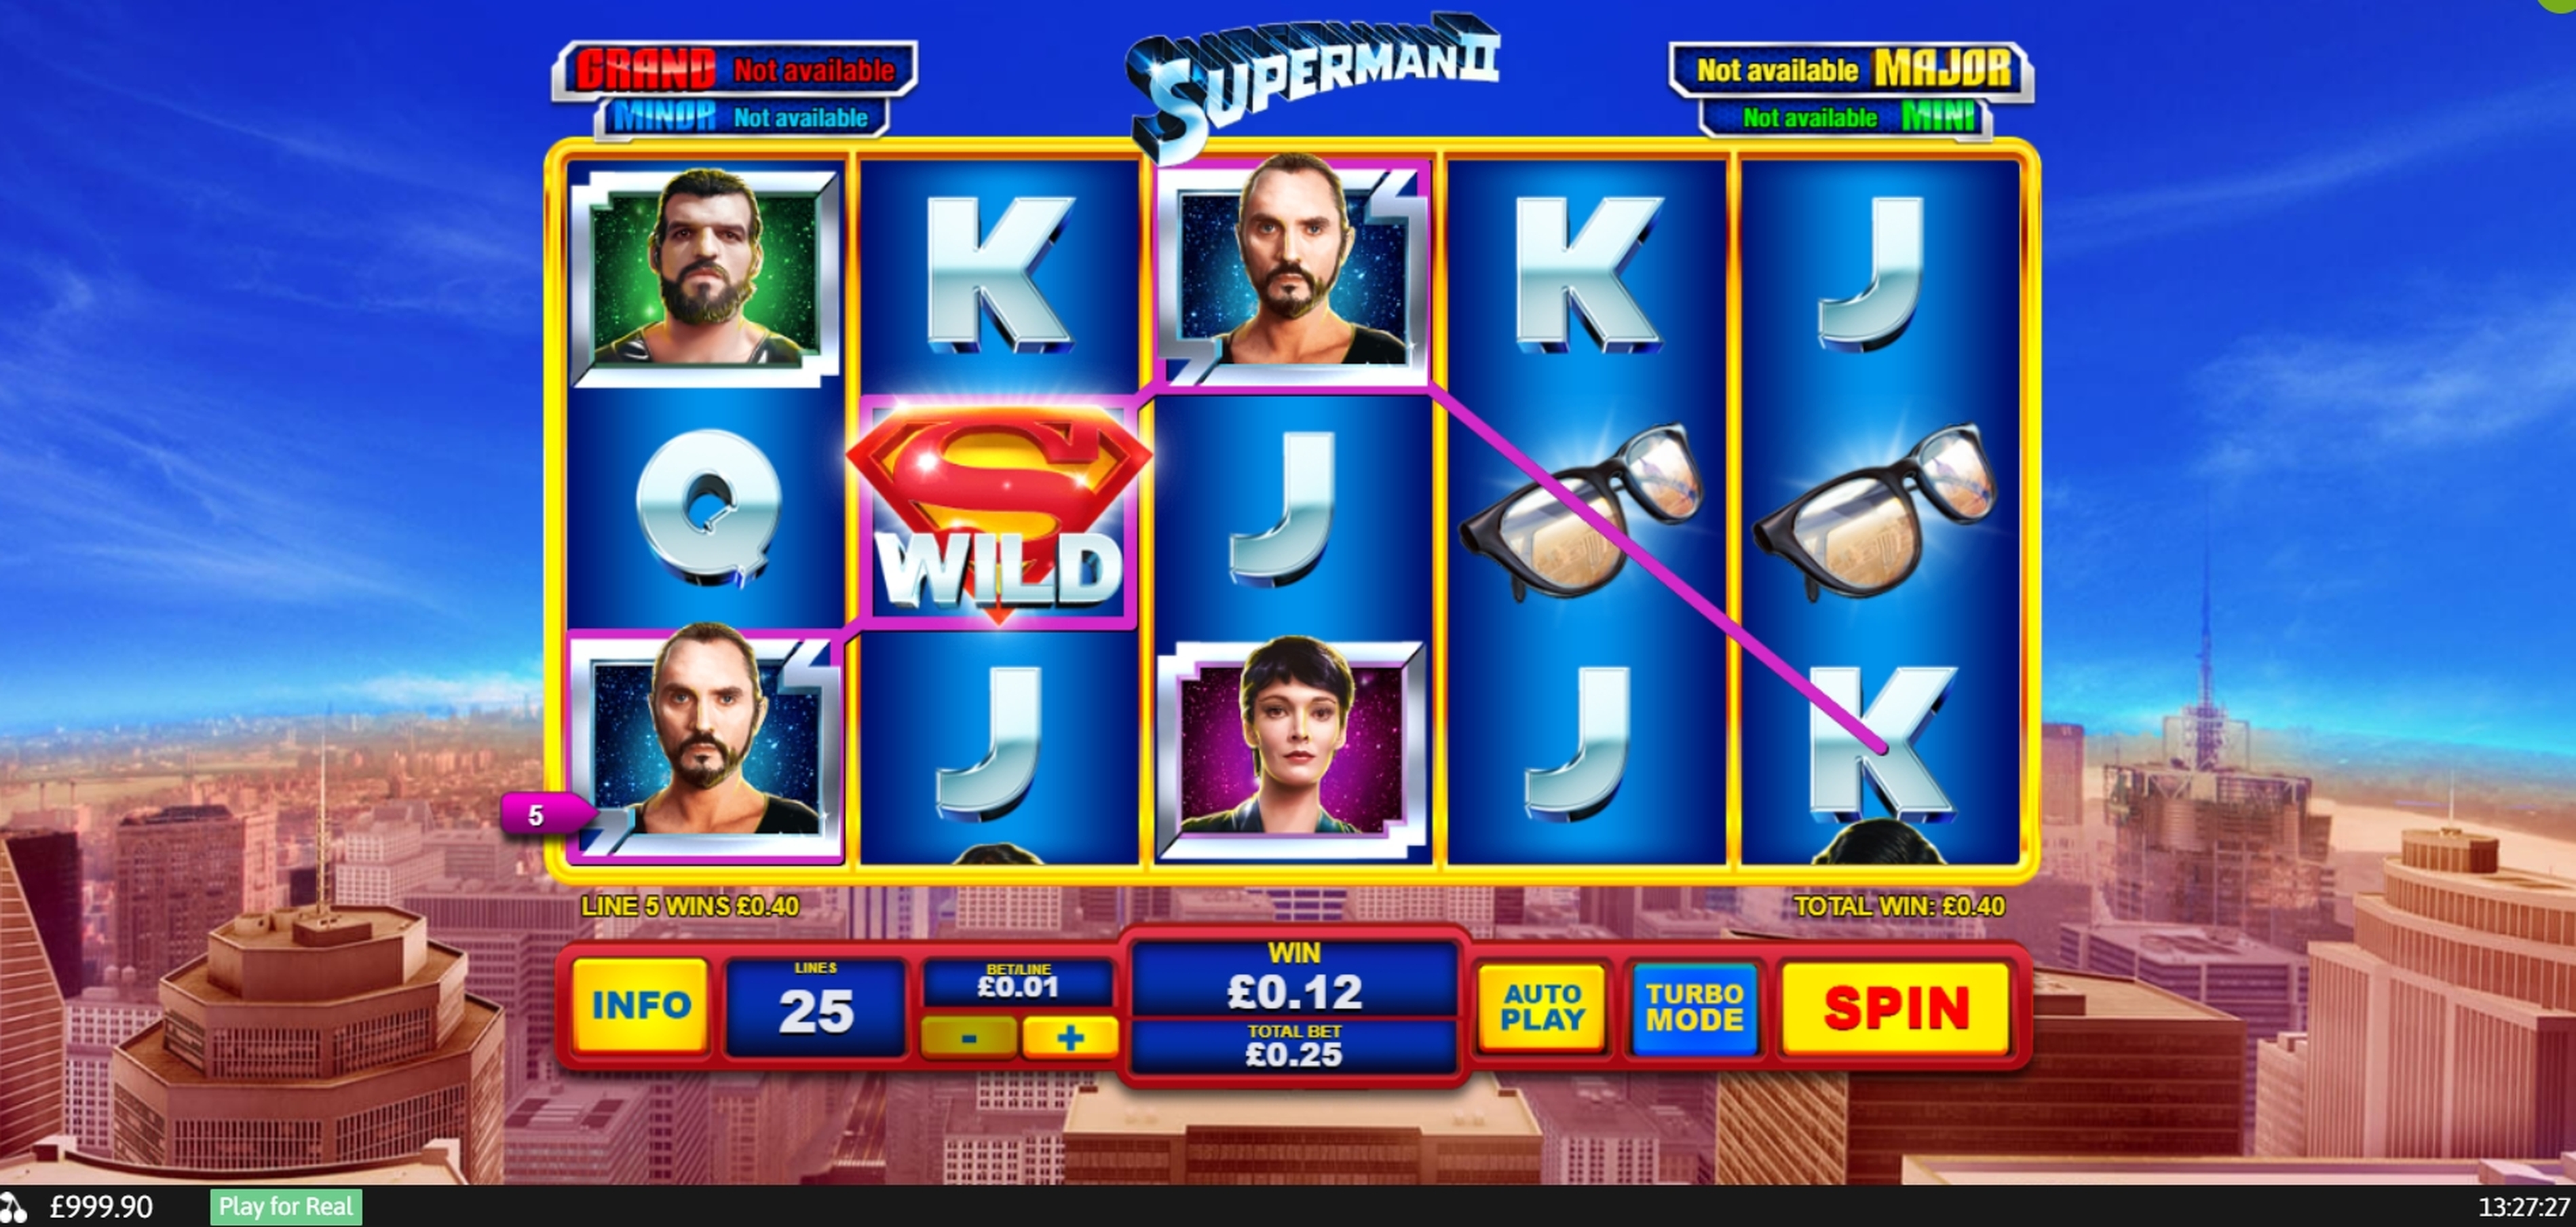 Win Money in Superman II Slot Free Slot Game by Playtech